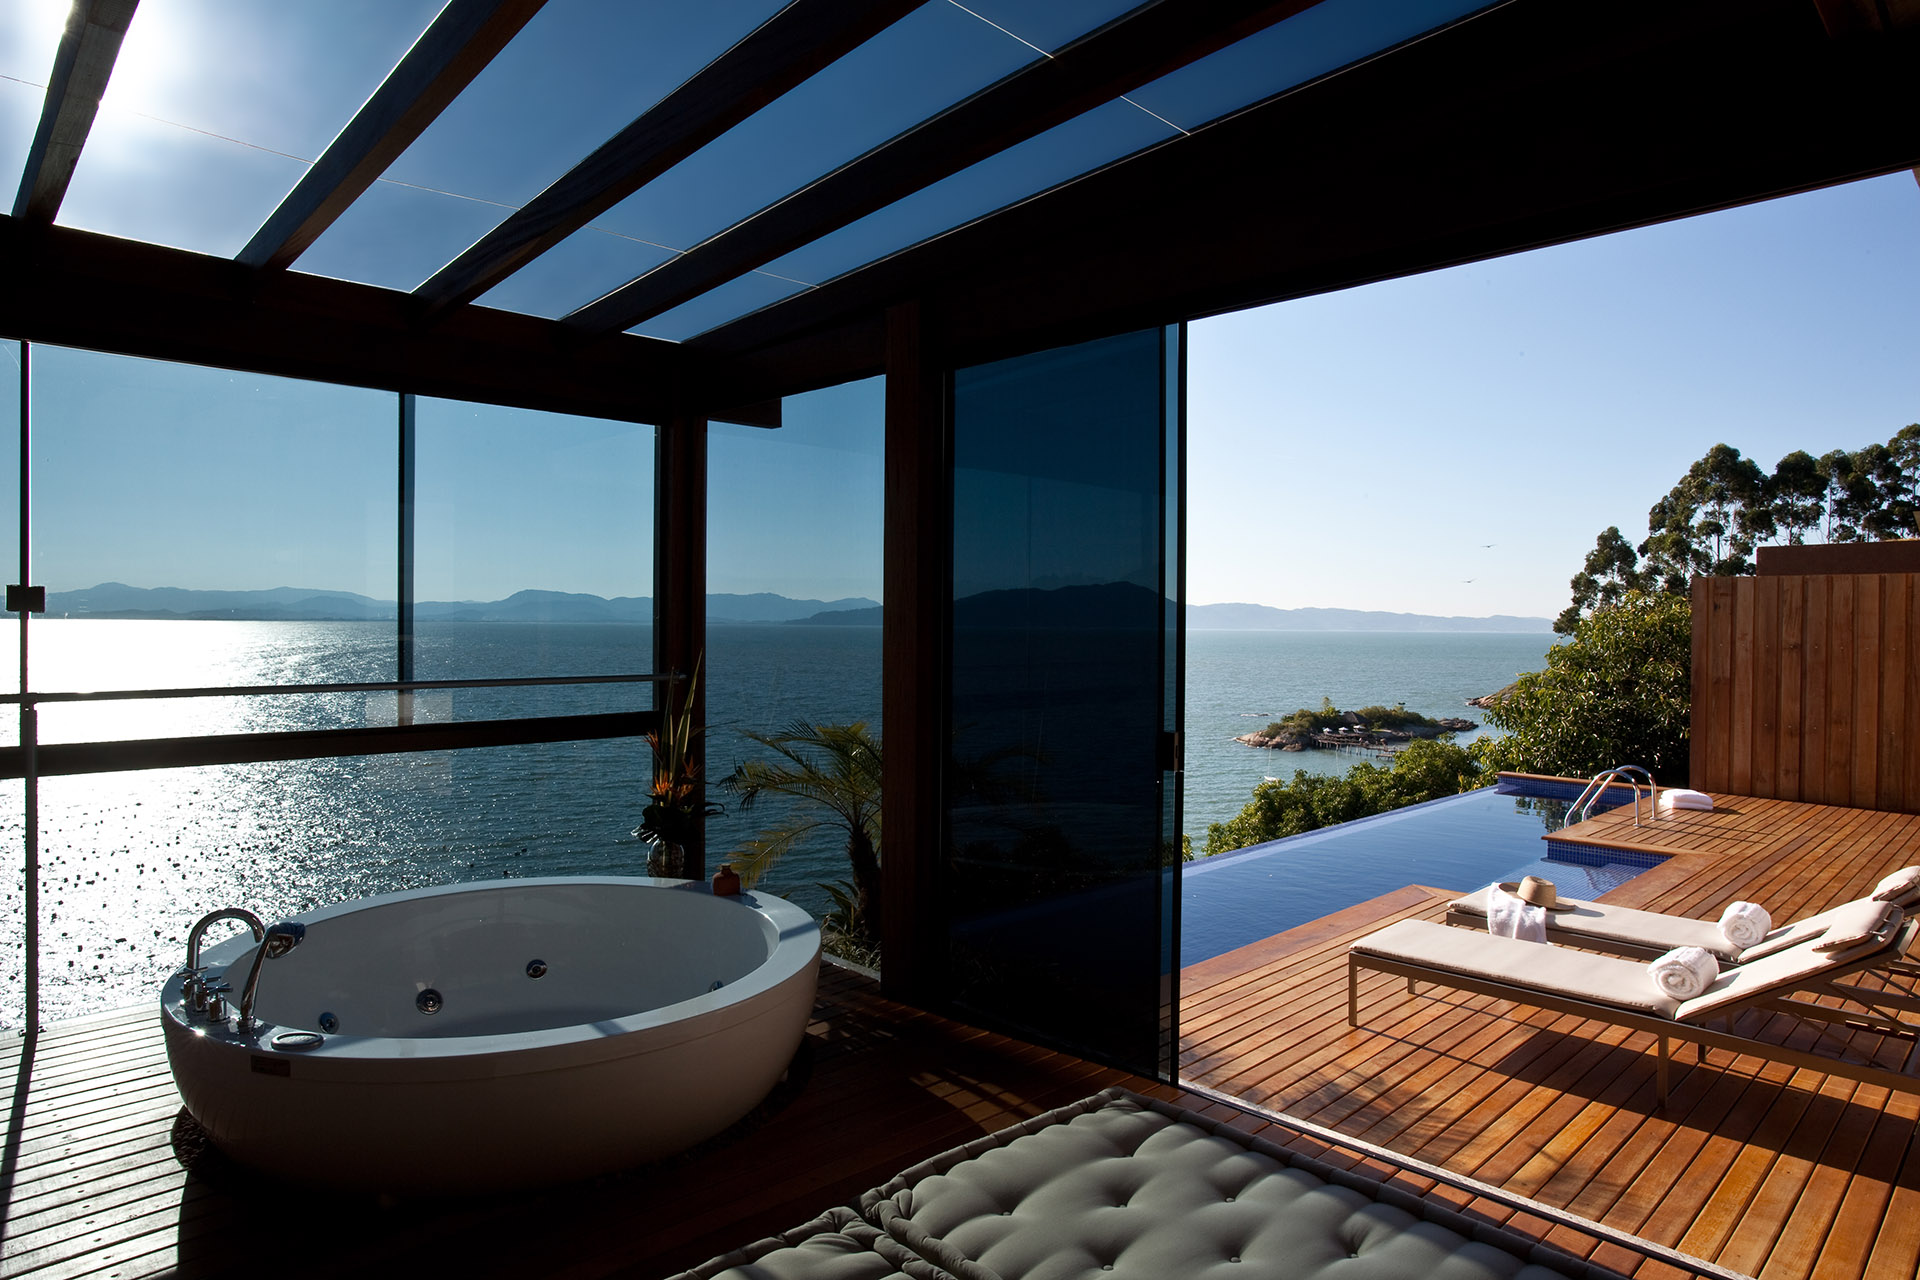 a large tub overlooking a body of water